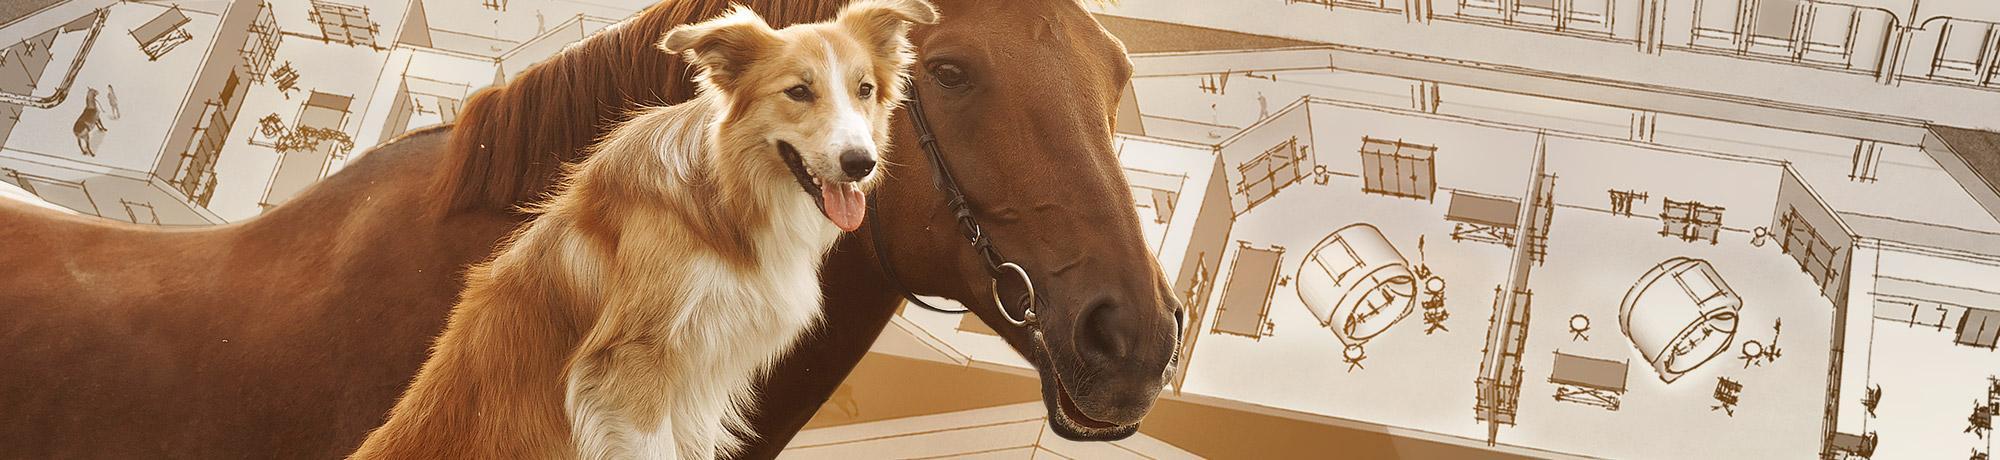 Horse and dog in front of sketches of veterinary medical center